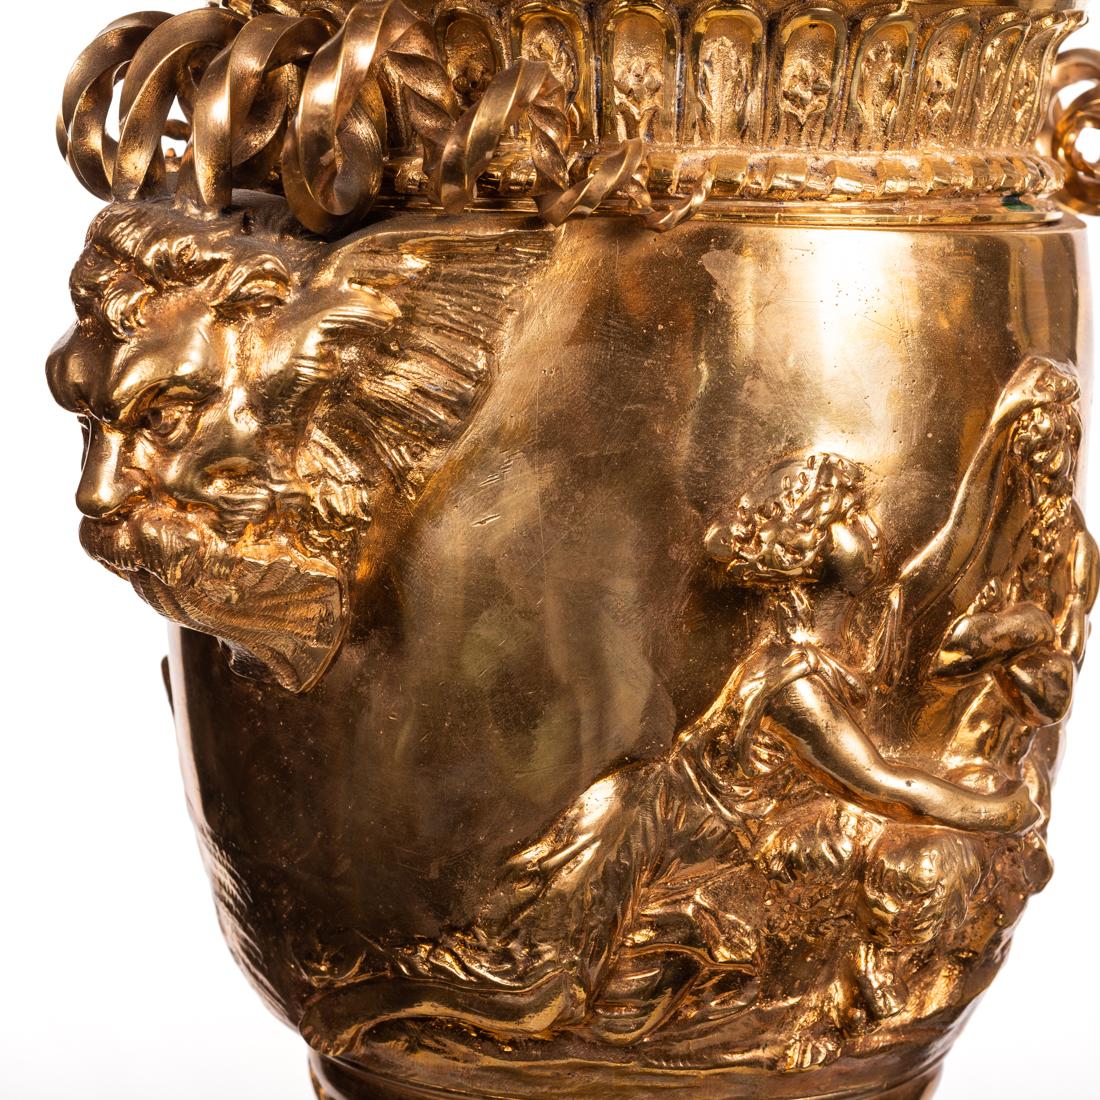 A gilt bronze urn-form table lamp,
after the antique, a gilt bronze urn-form table lamp. 
Measures: Height 31 in. (78.74 cm.) (overall ) 
Width 8 in. (20.32 cm.) 
Depth 7 in. (17.78 cm.)
 